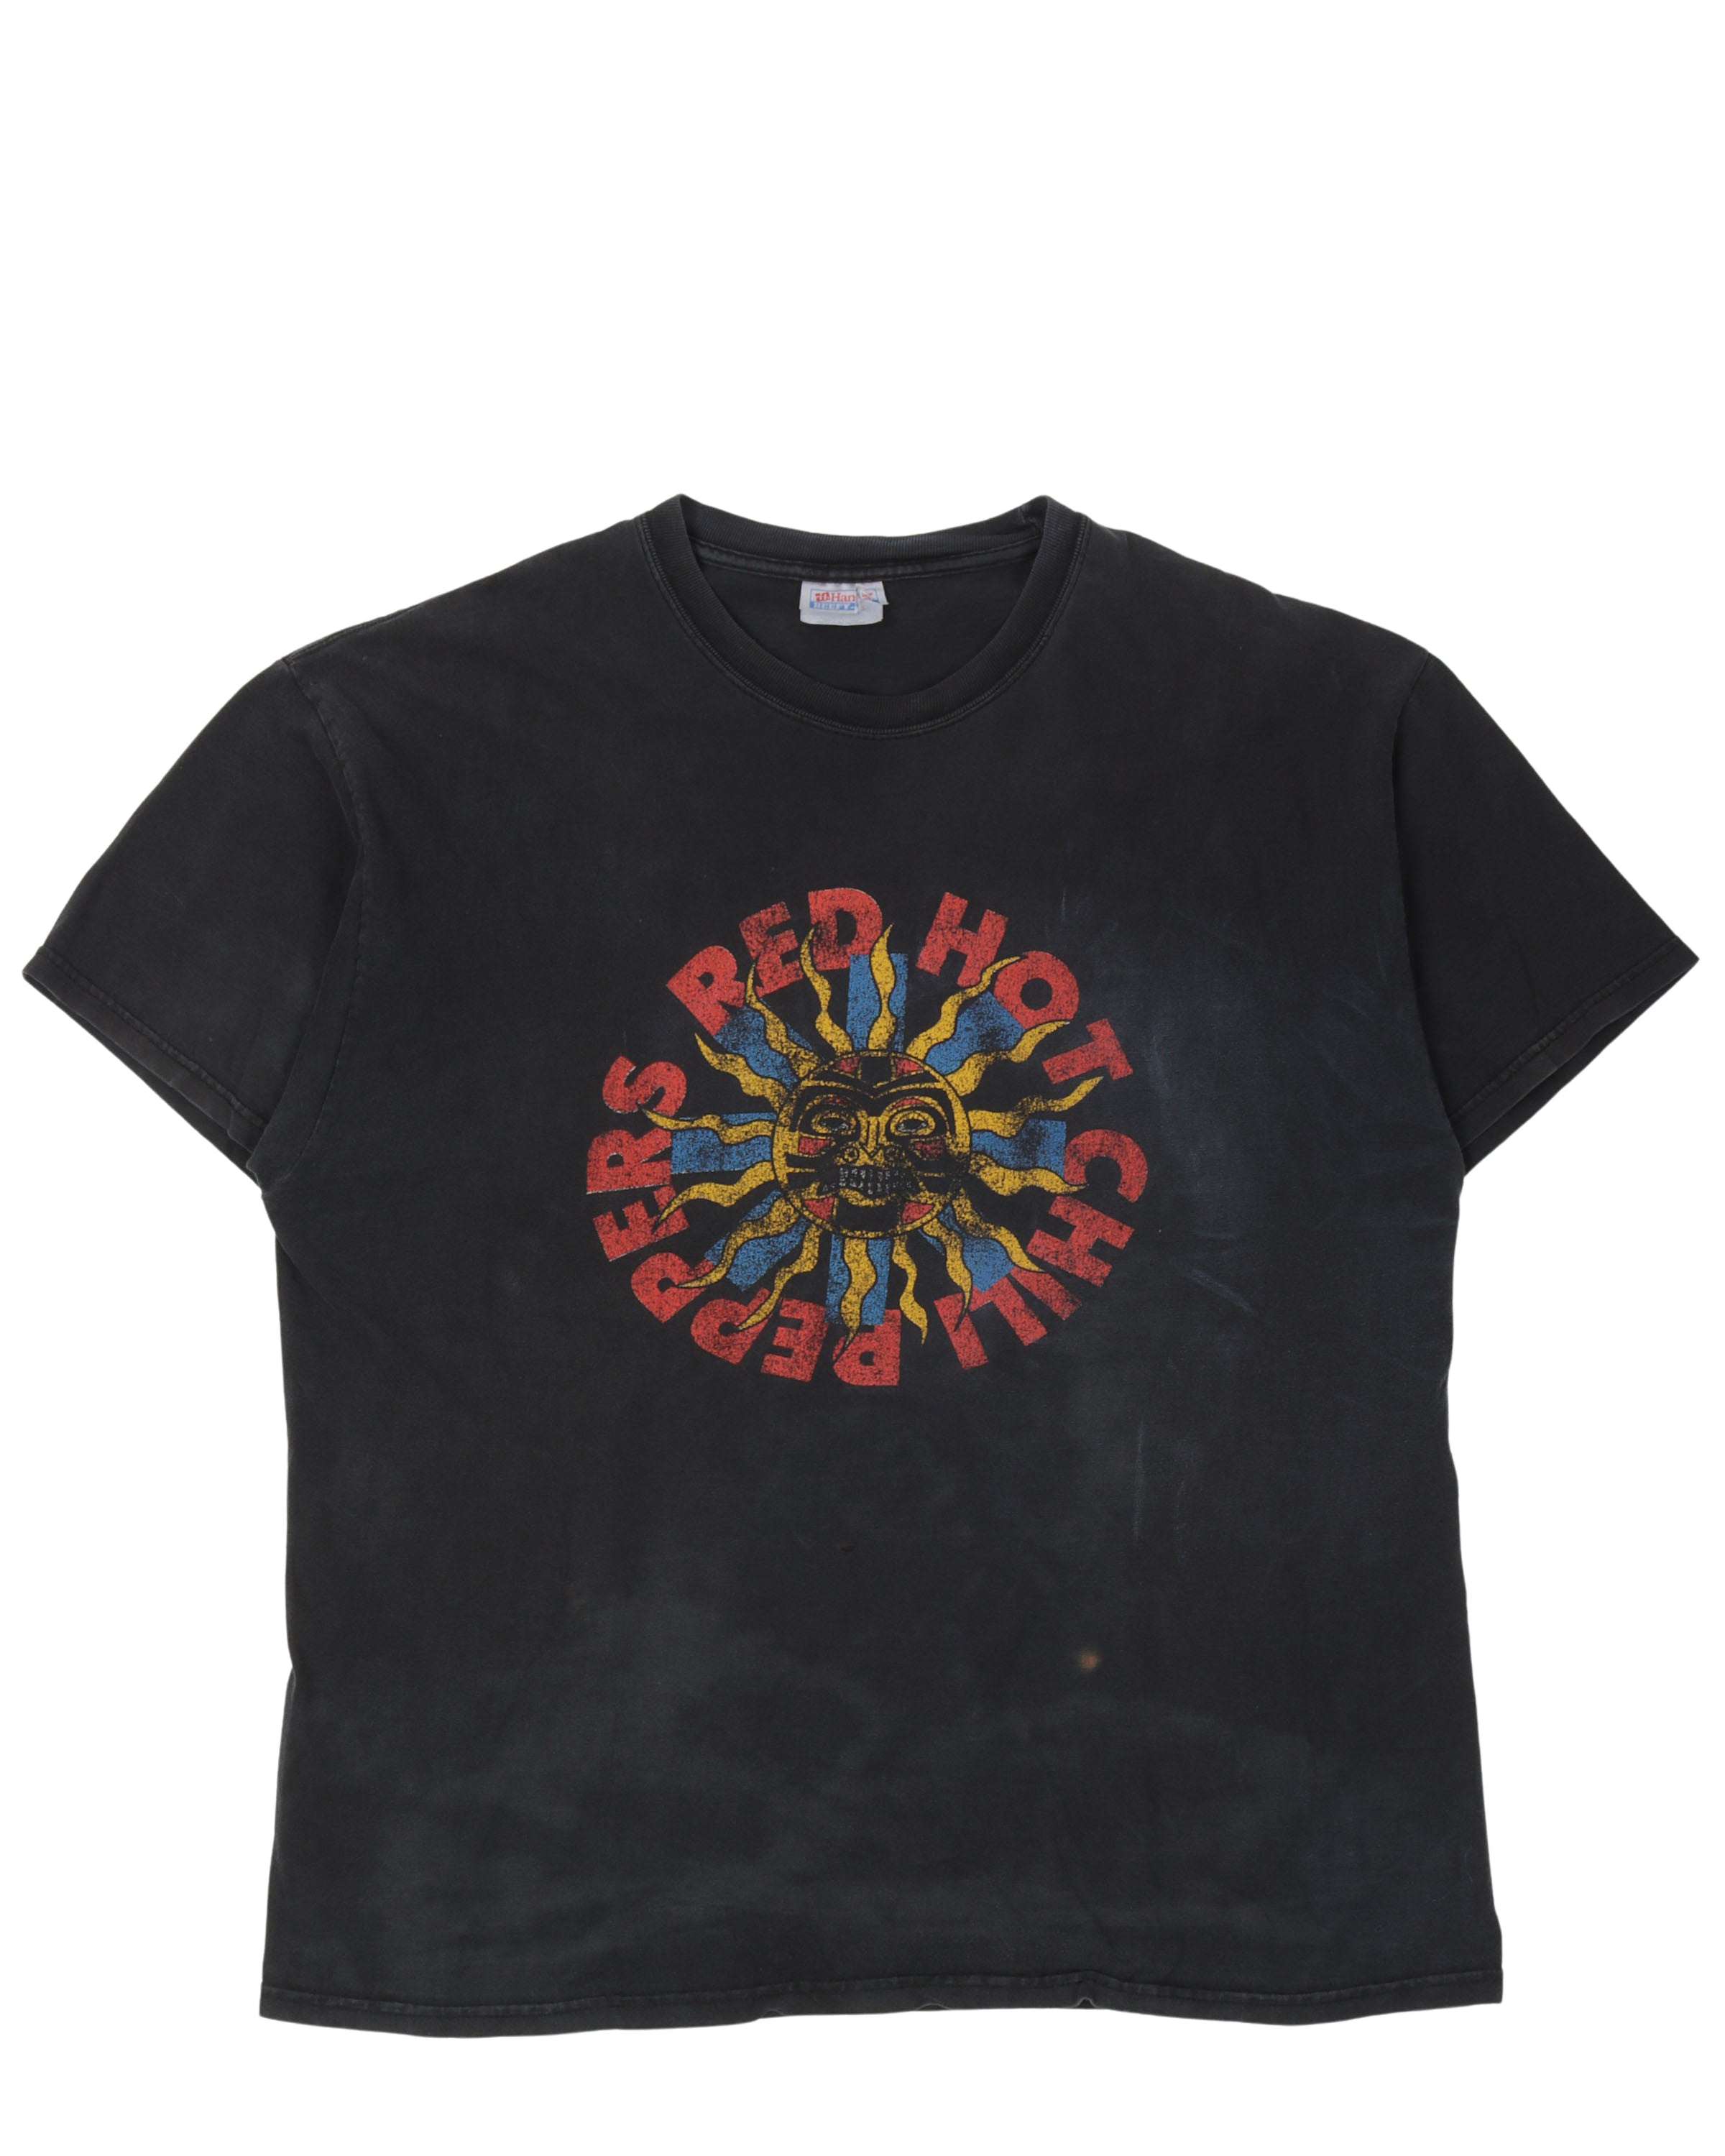 Vintage Red Hot Chili Peppers 2003 Tour T-Shirt